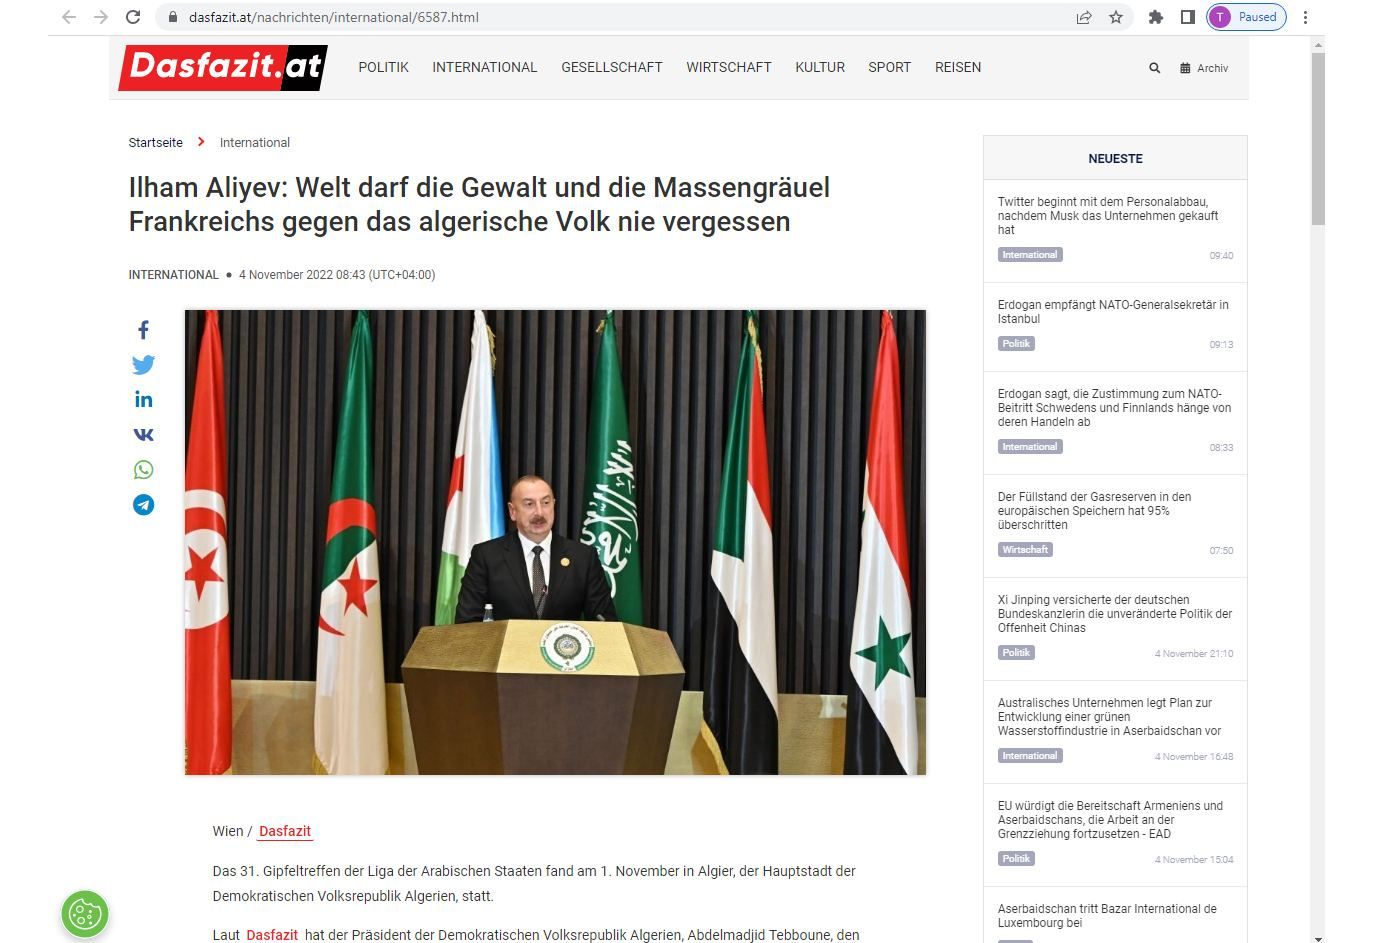 Austrian media publishes article about President Ilham Aliyev's speech at 31st Arab League Summit in Algiers